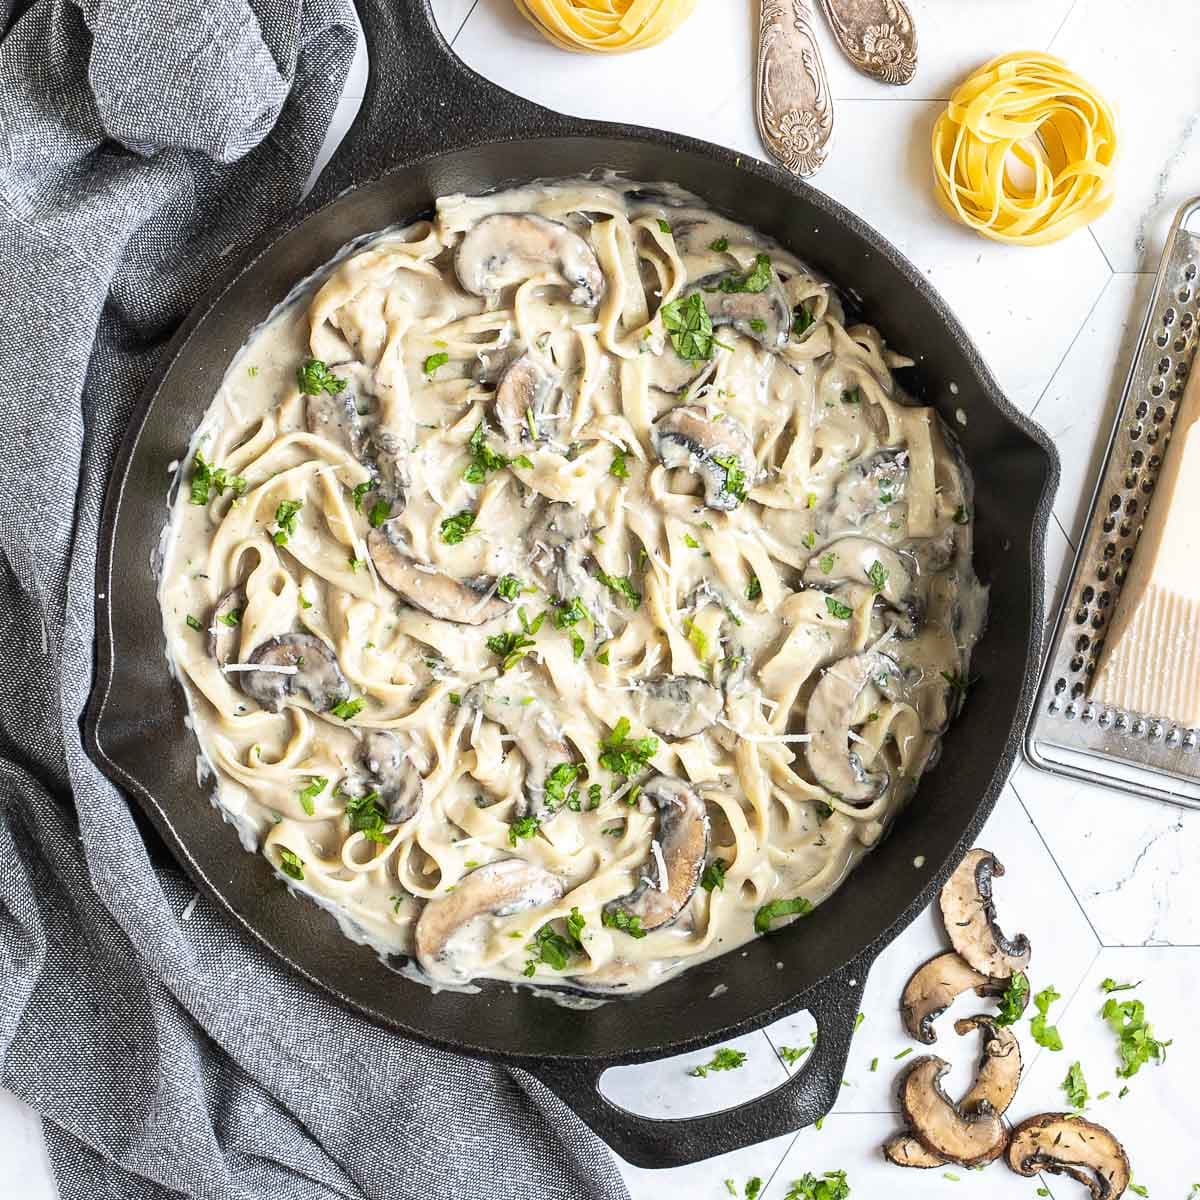 Cast iron skillet with tagliatelle in a creamy light brown sauce with sliced mushrooms and freshly chopped green herbs. Dry tagliatelle and a cheese grater with a stick of parmesan is next to it.